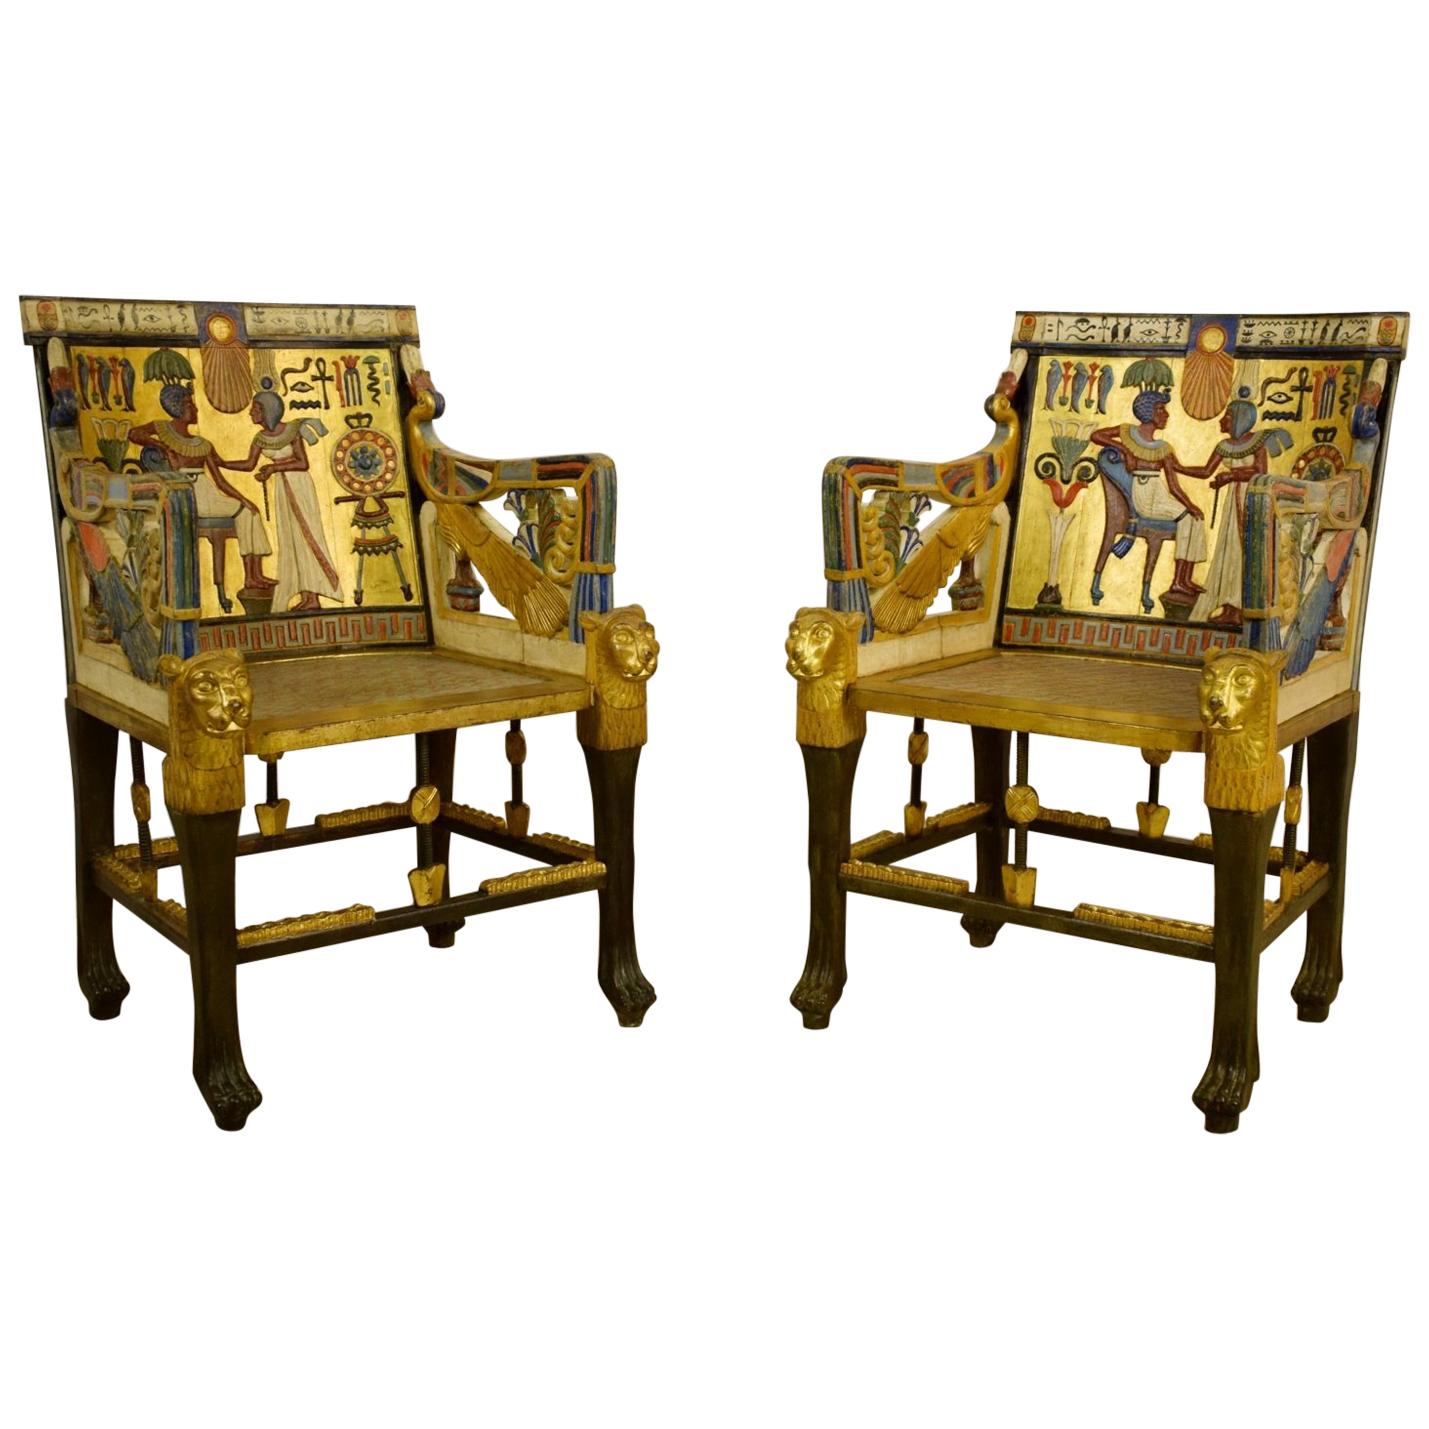 20th Century, Pair of Lacquered Giltwood Armchairs in Egyptian Revival Style